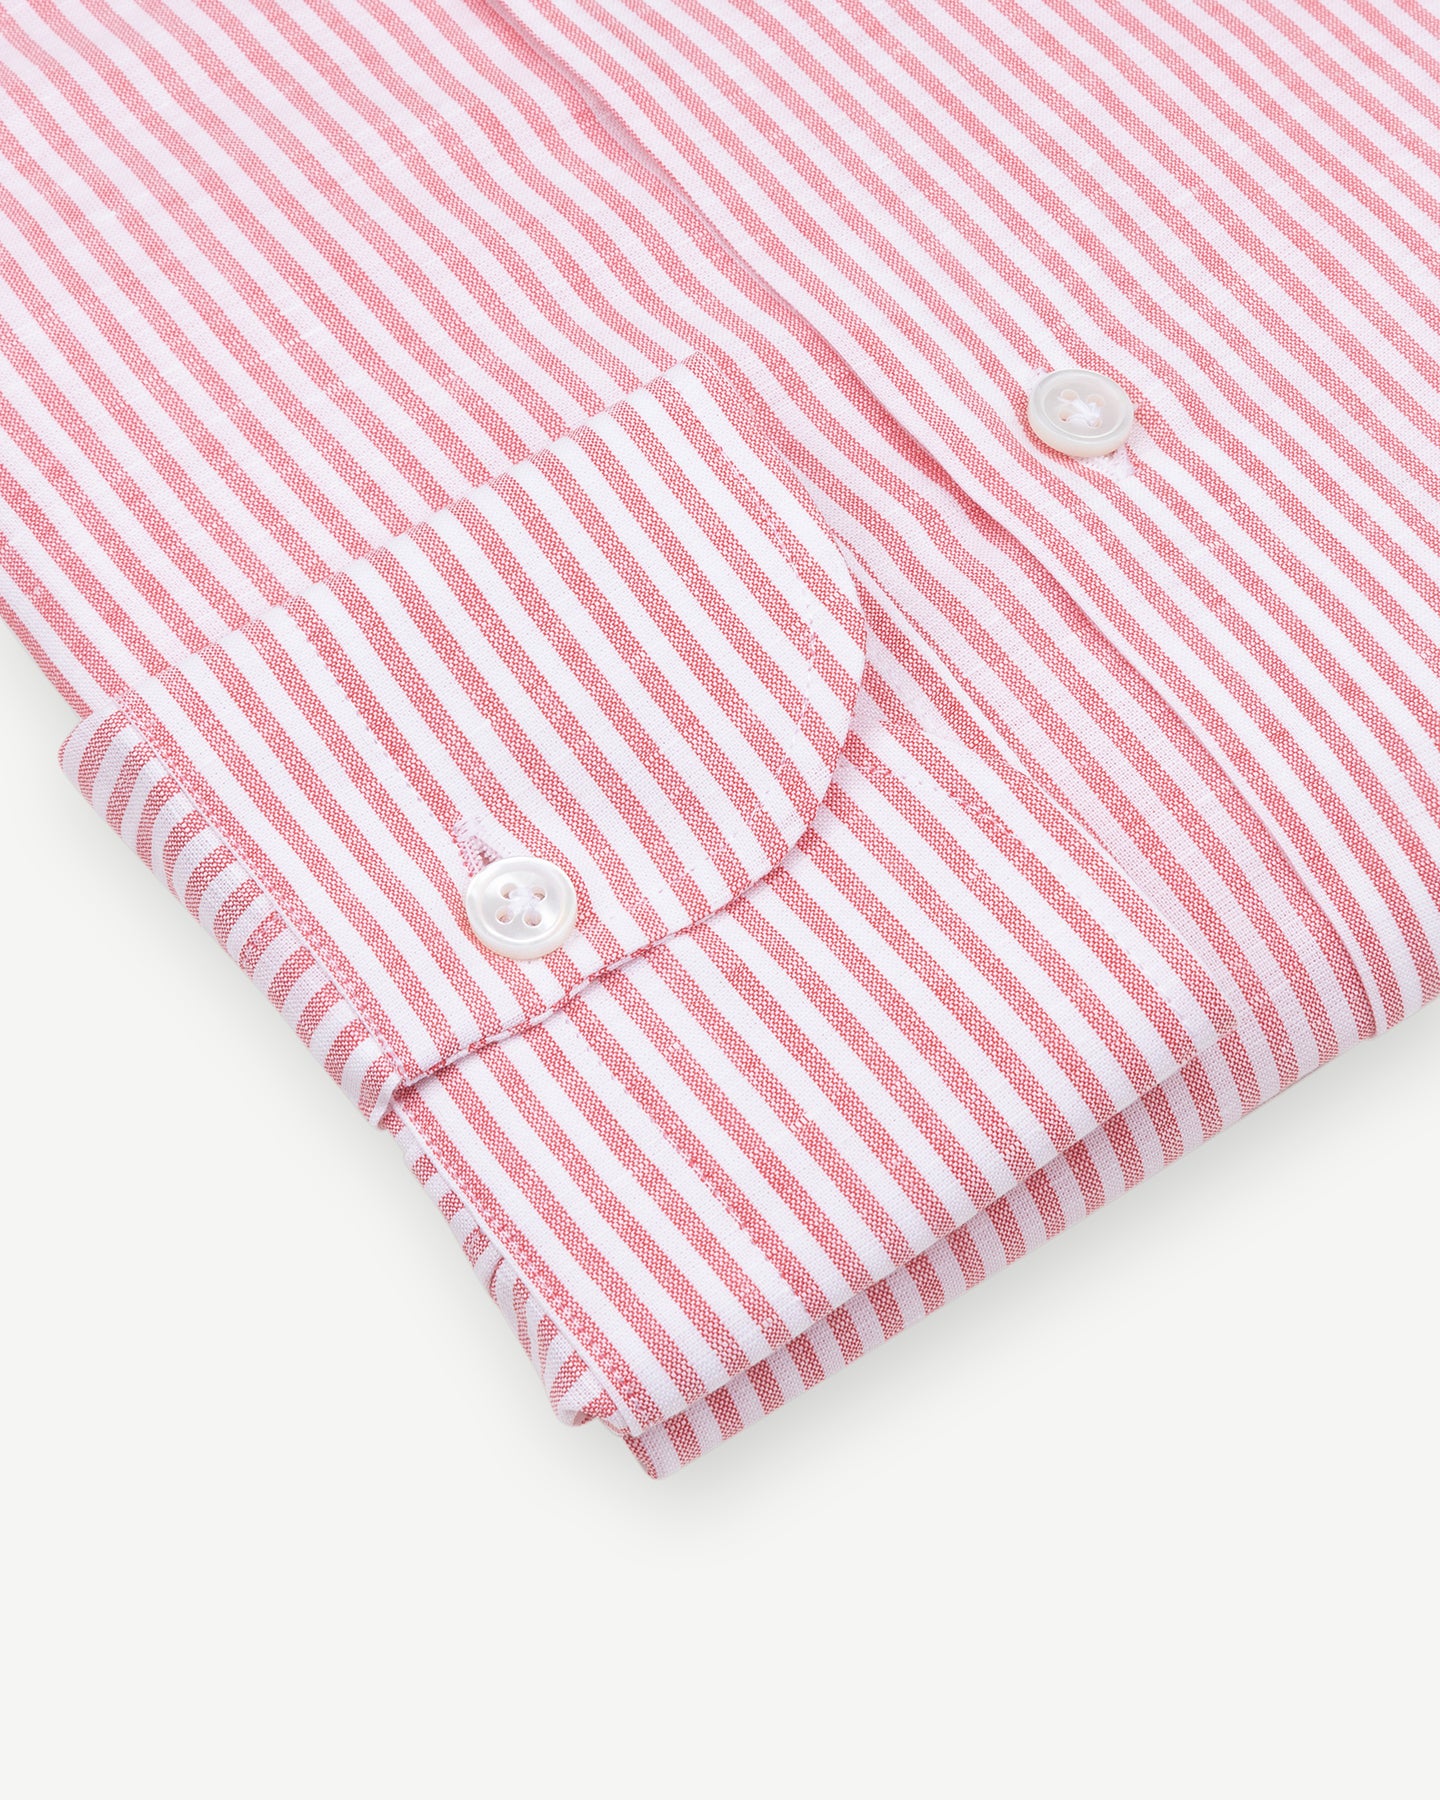 Red bengal stripe cotton linen shirt with single cuffs